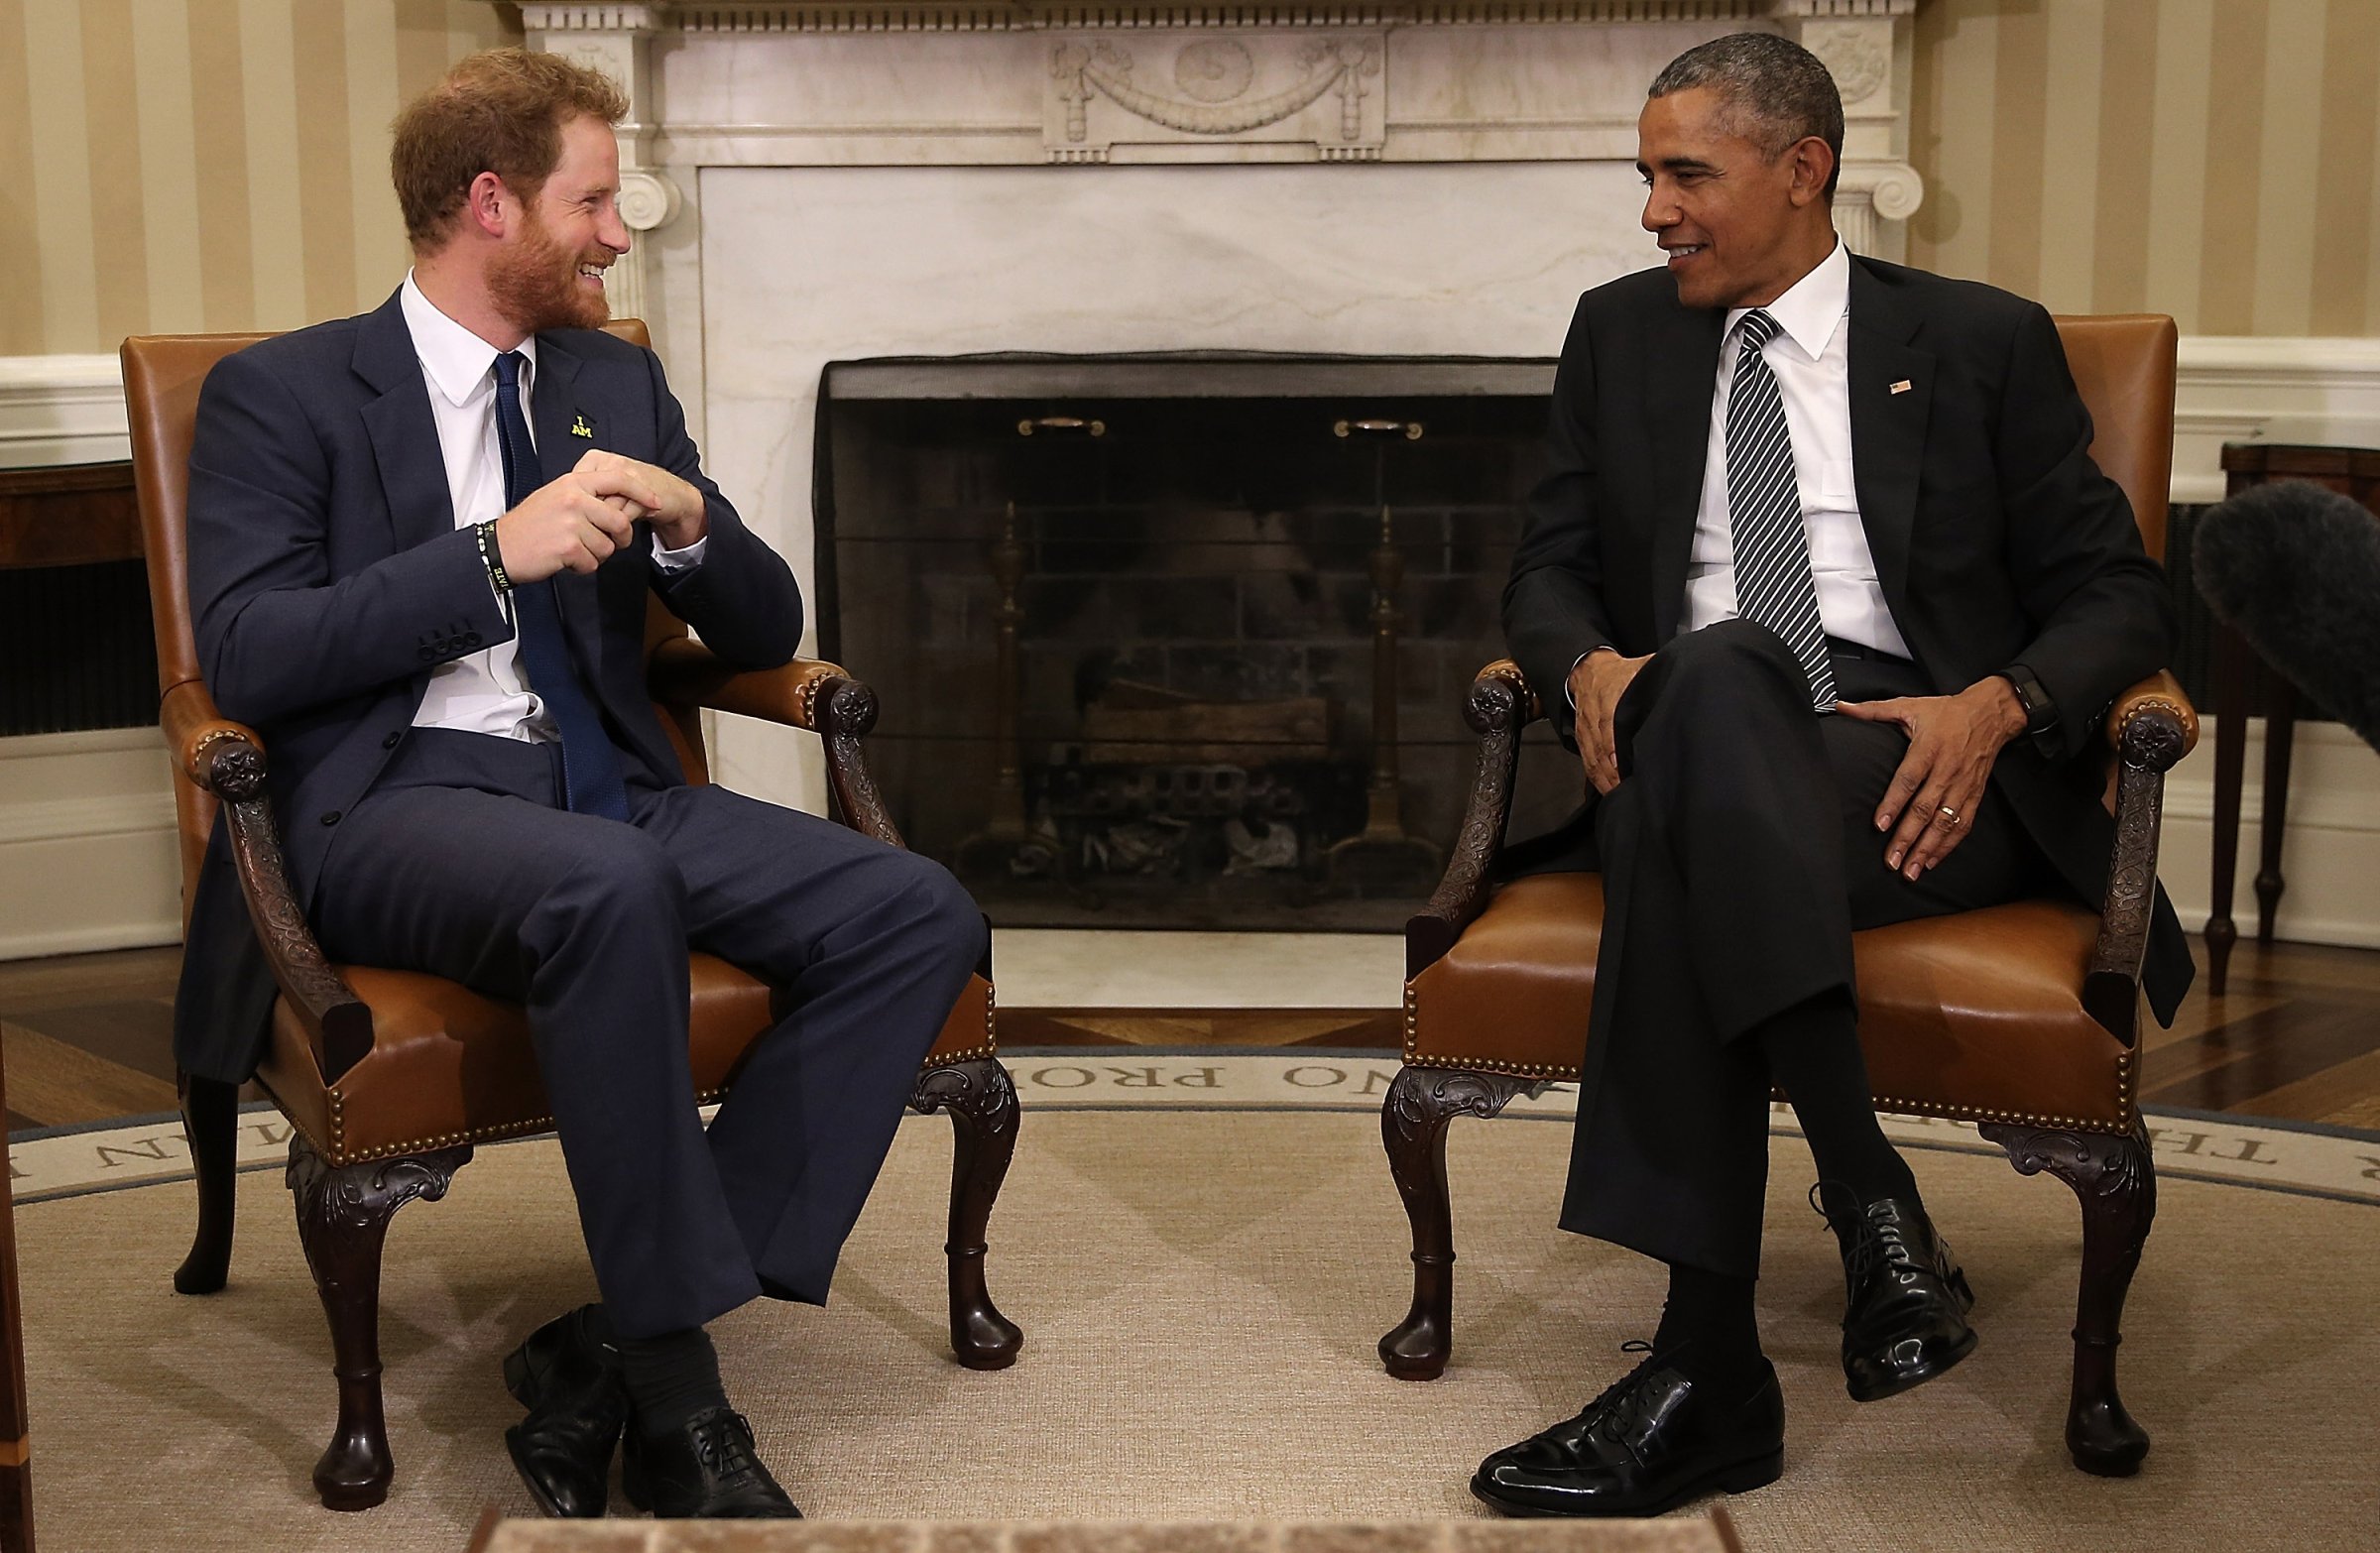 President Obama Welcomes Prince Harry To White House